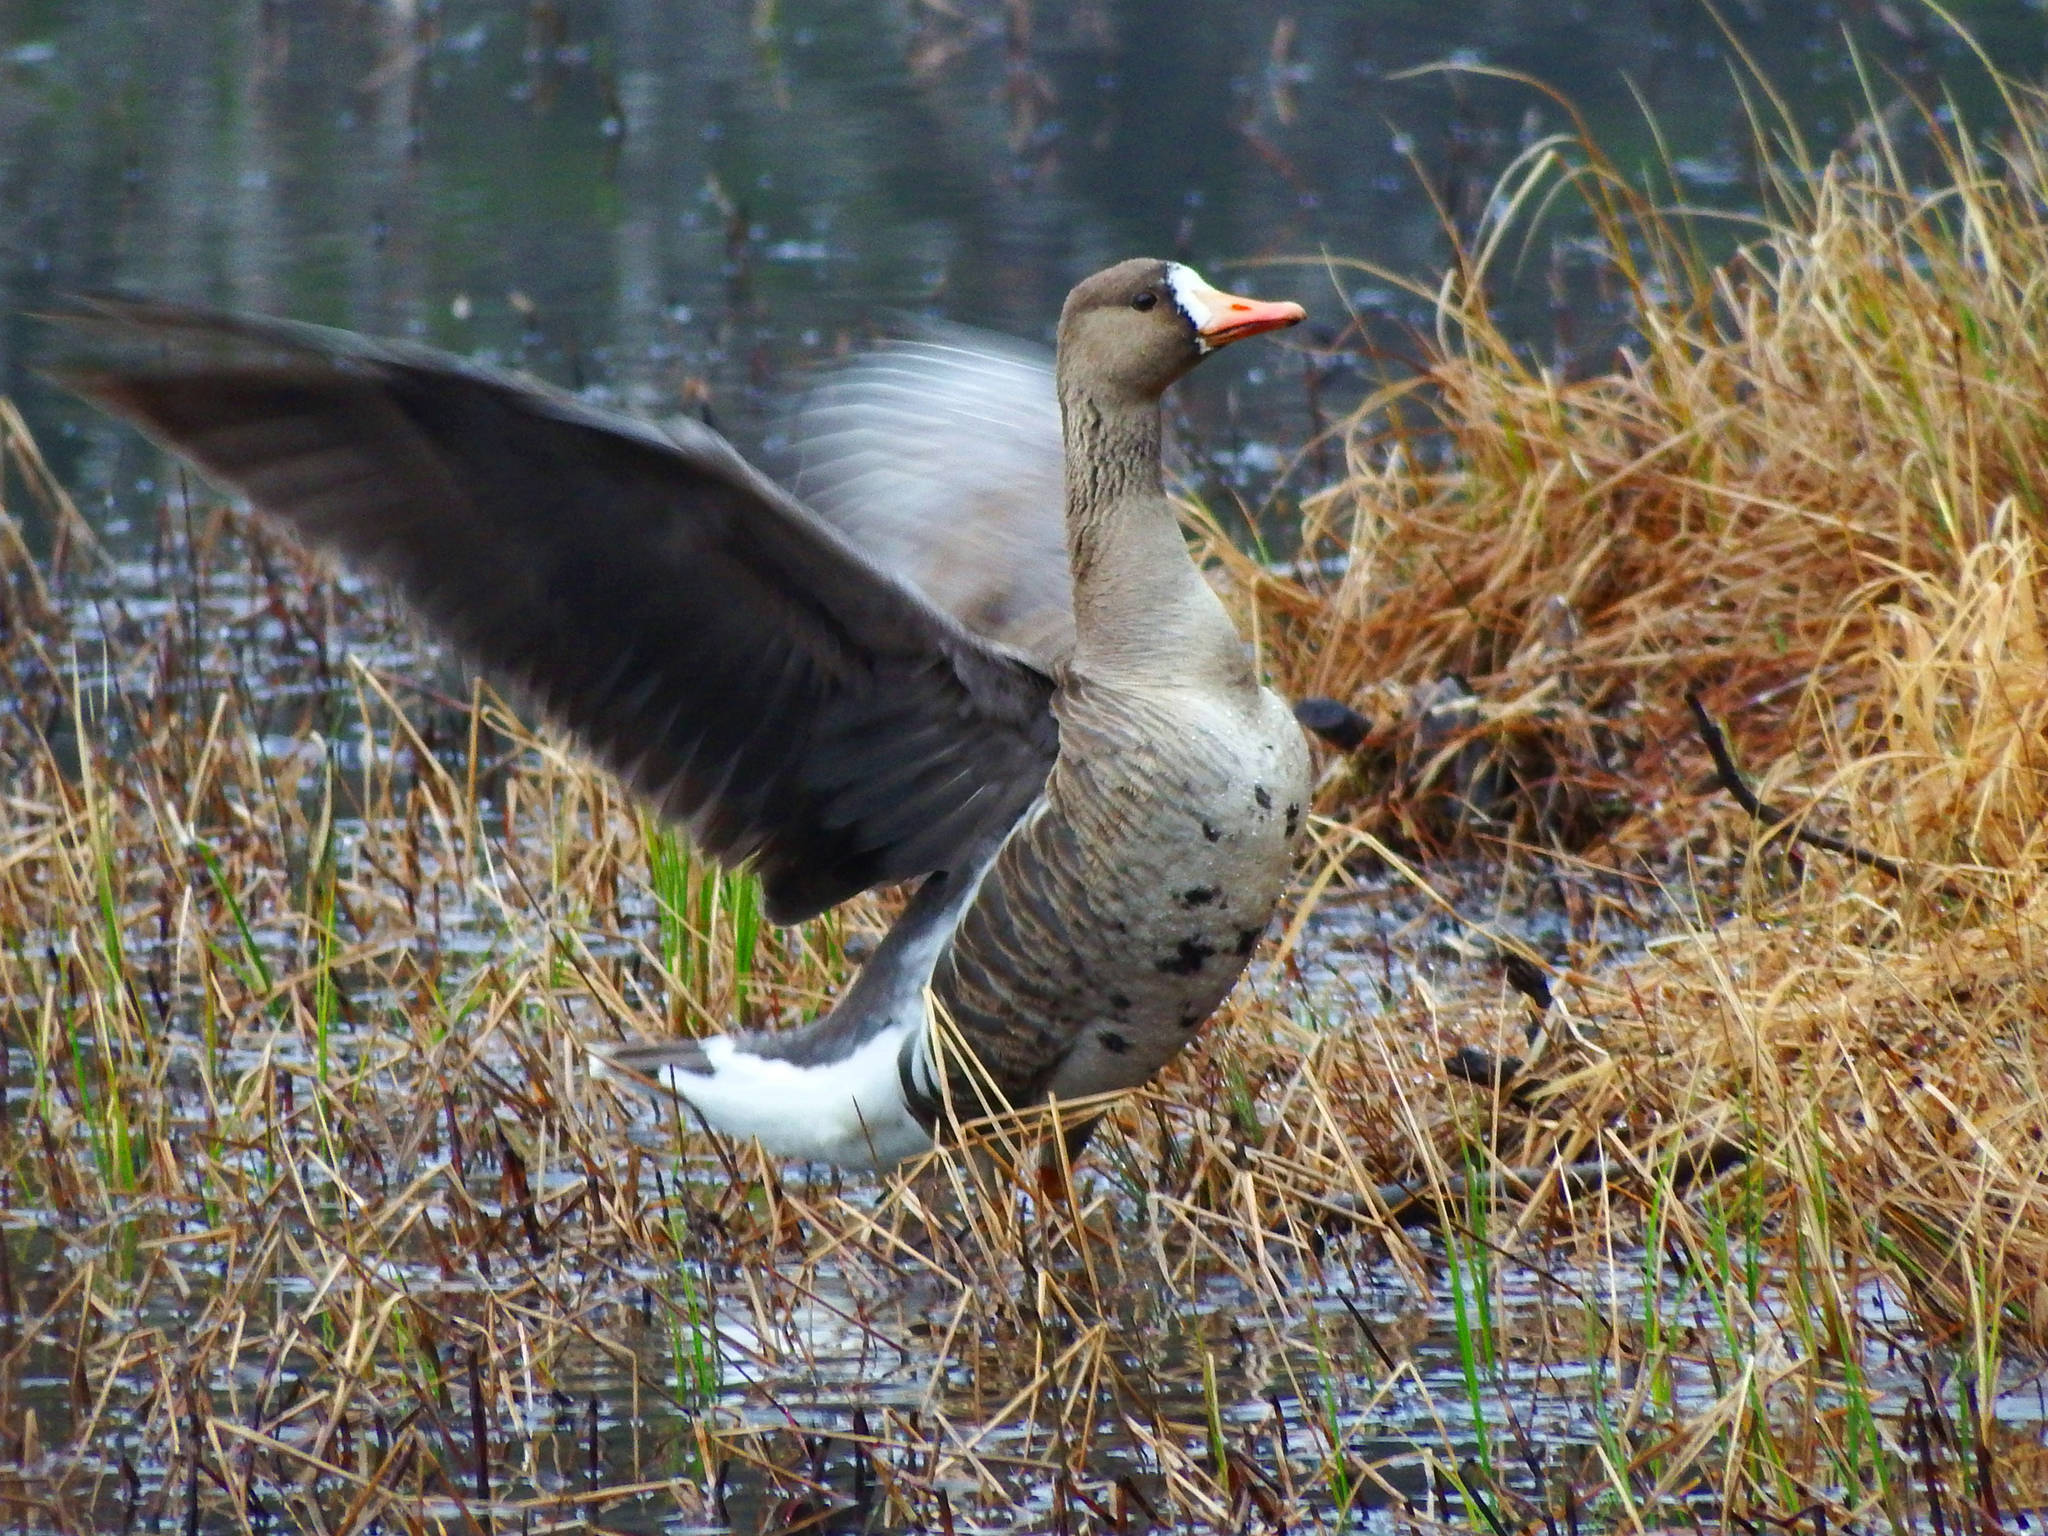 A greater white-fronted goose at Mendenhall Campground on April 27, 2019. (Courtesy Photo | Linda Shaw)